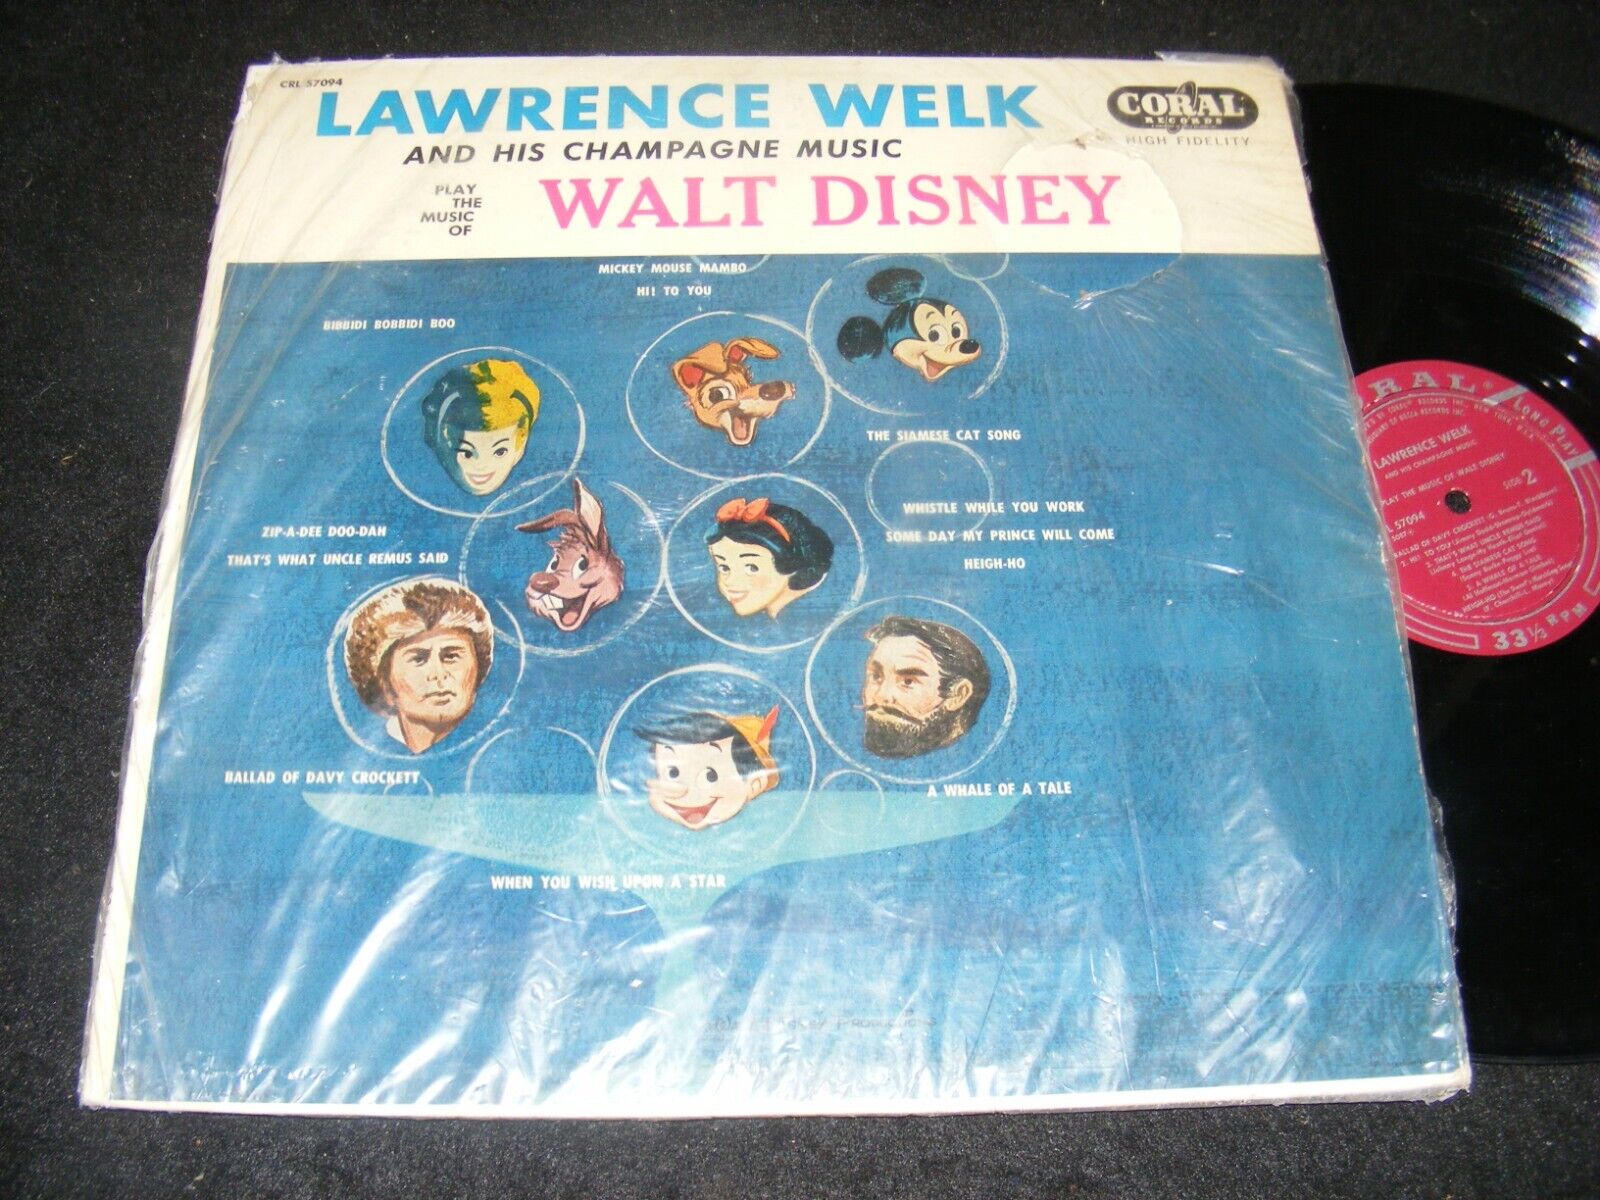 Scarce WALT DISNEY Music LP Coral LAWRENCE WELK with Champagne Glass Cover